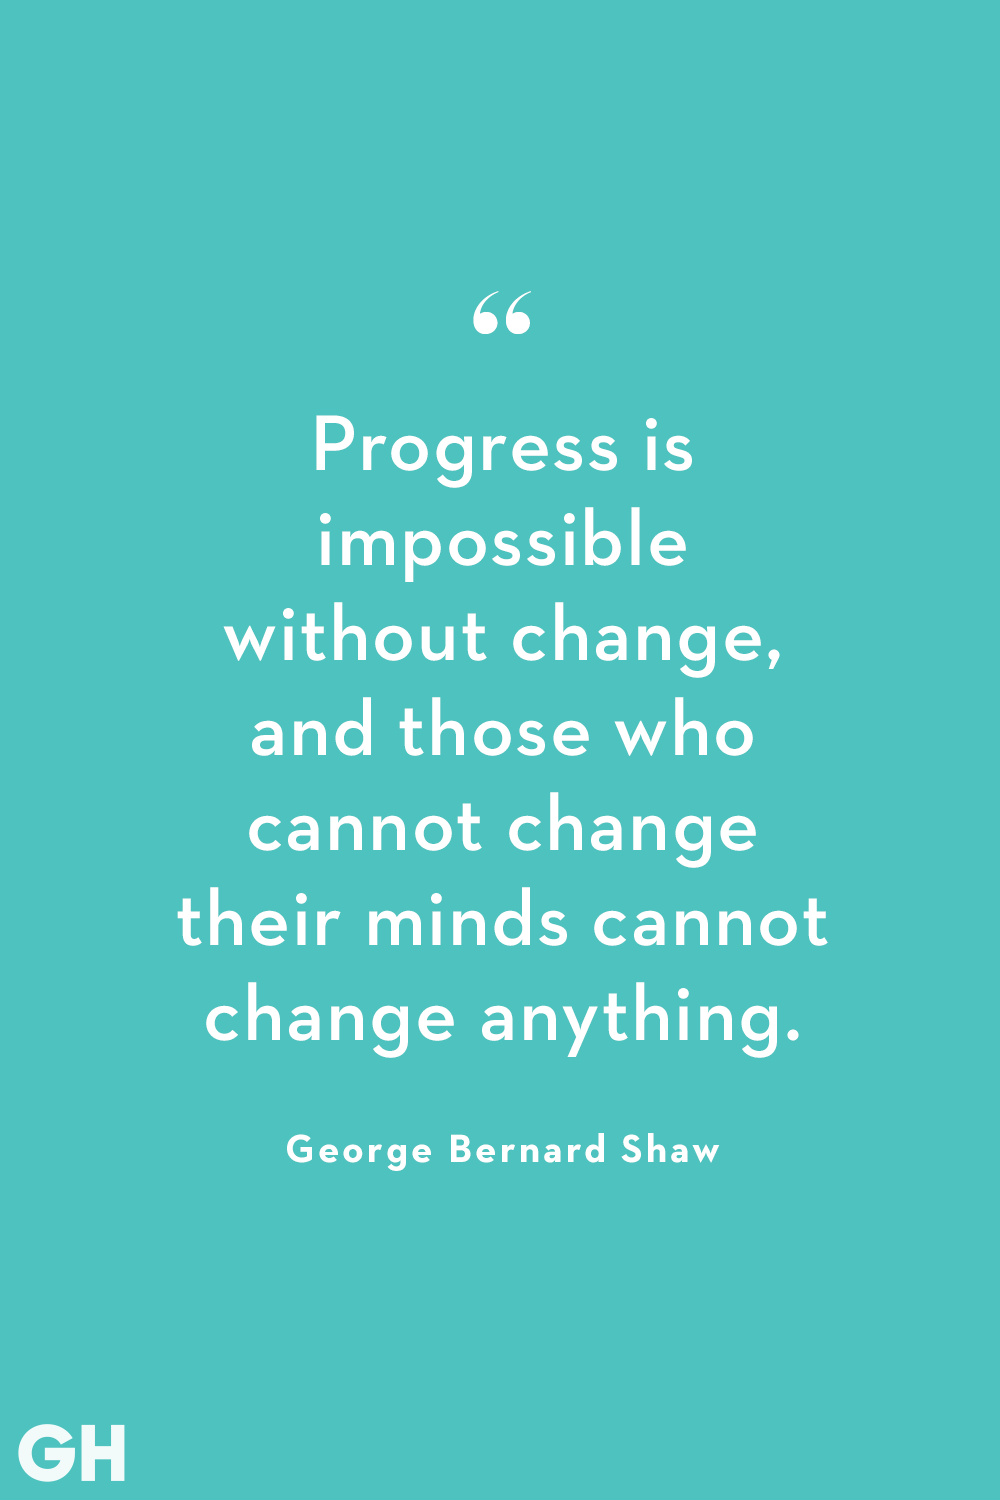 wise quotes about change